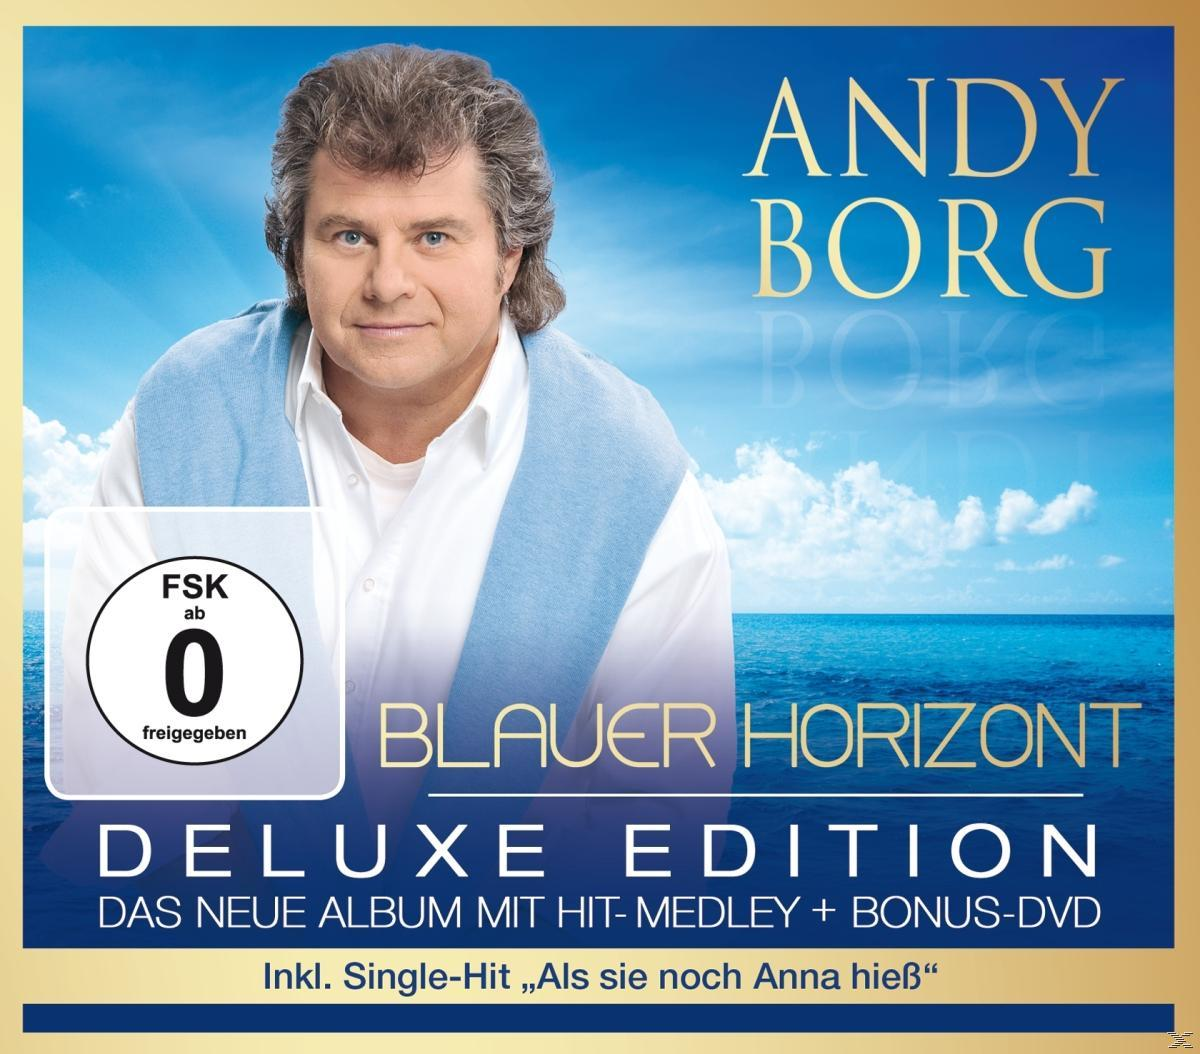 Video) Horizont (CD DVD + - Deluxe-Edition Blauer Andy - Borg -